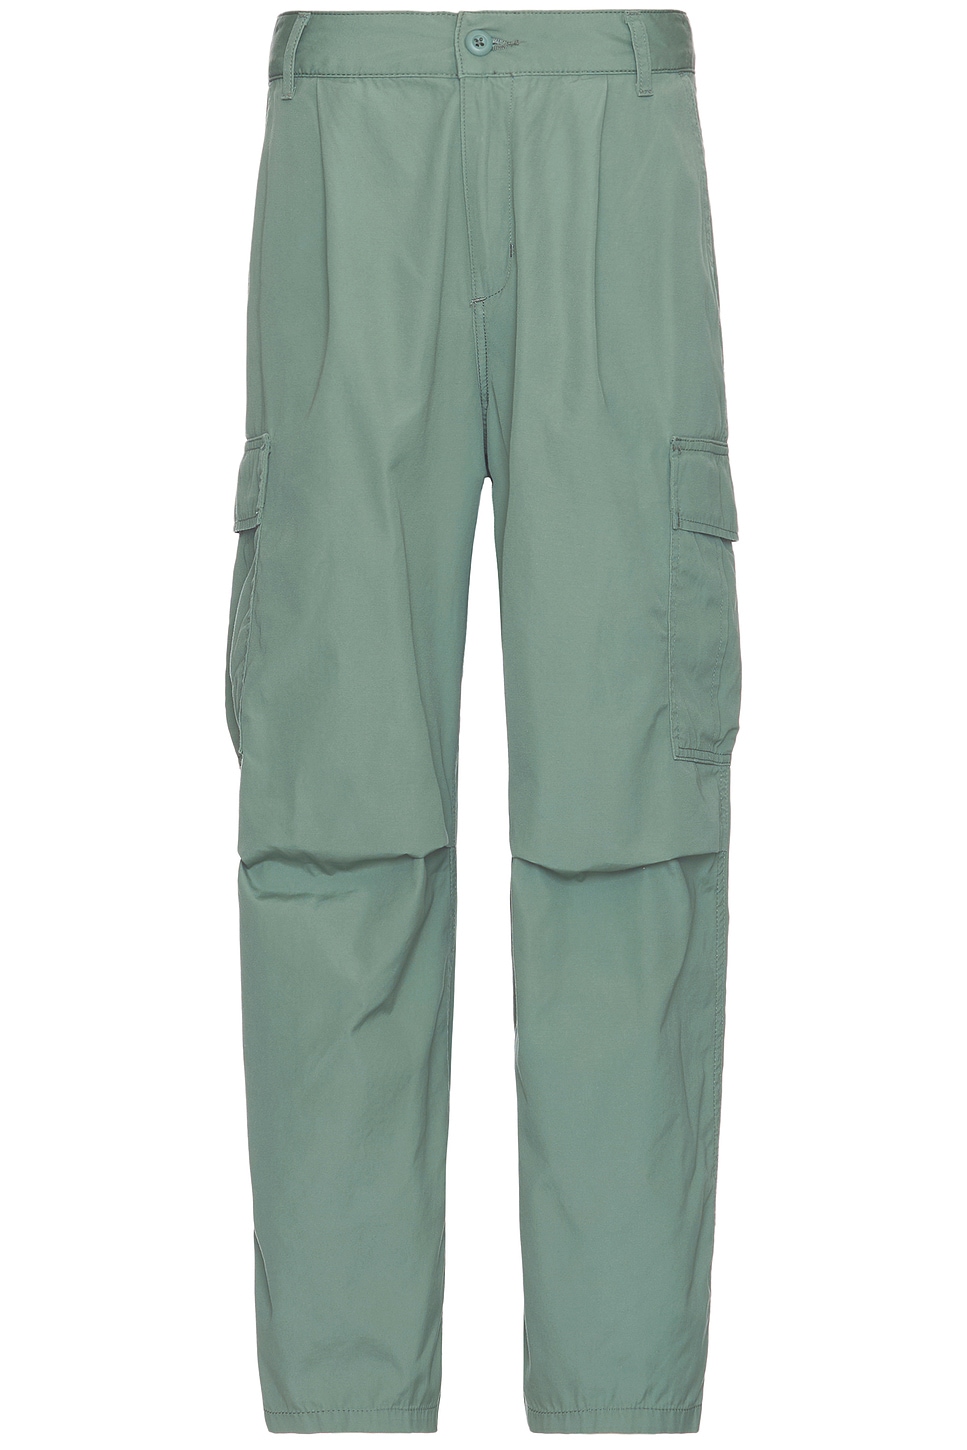 Image 1 of Carhartt WIP Cole Cargo Pant in Park Rinsed